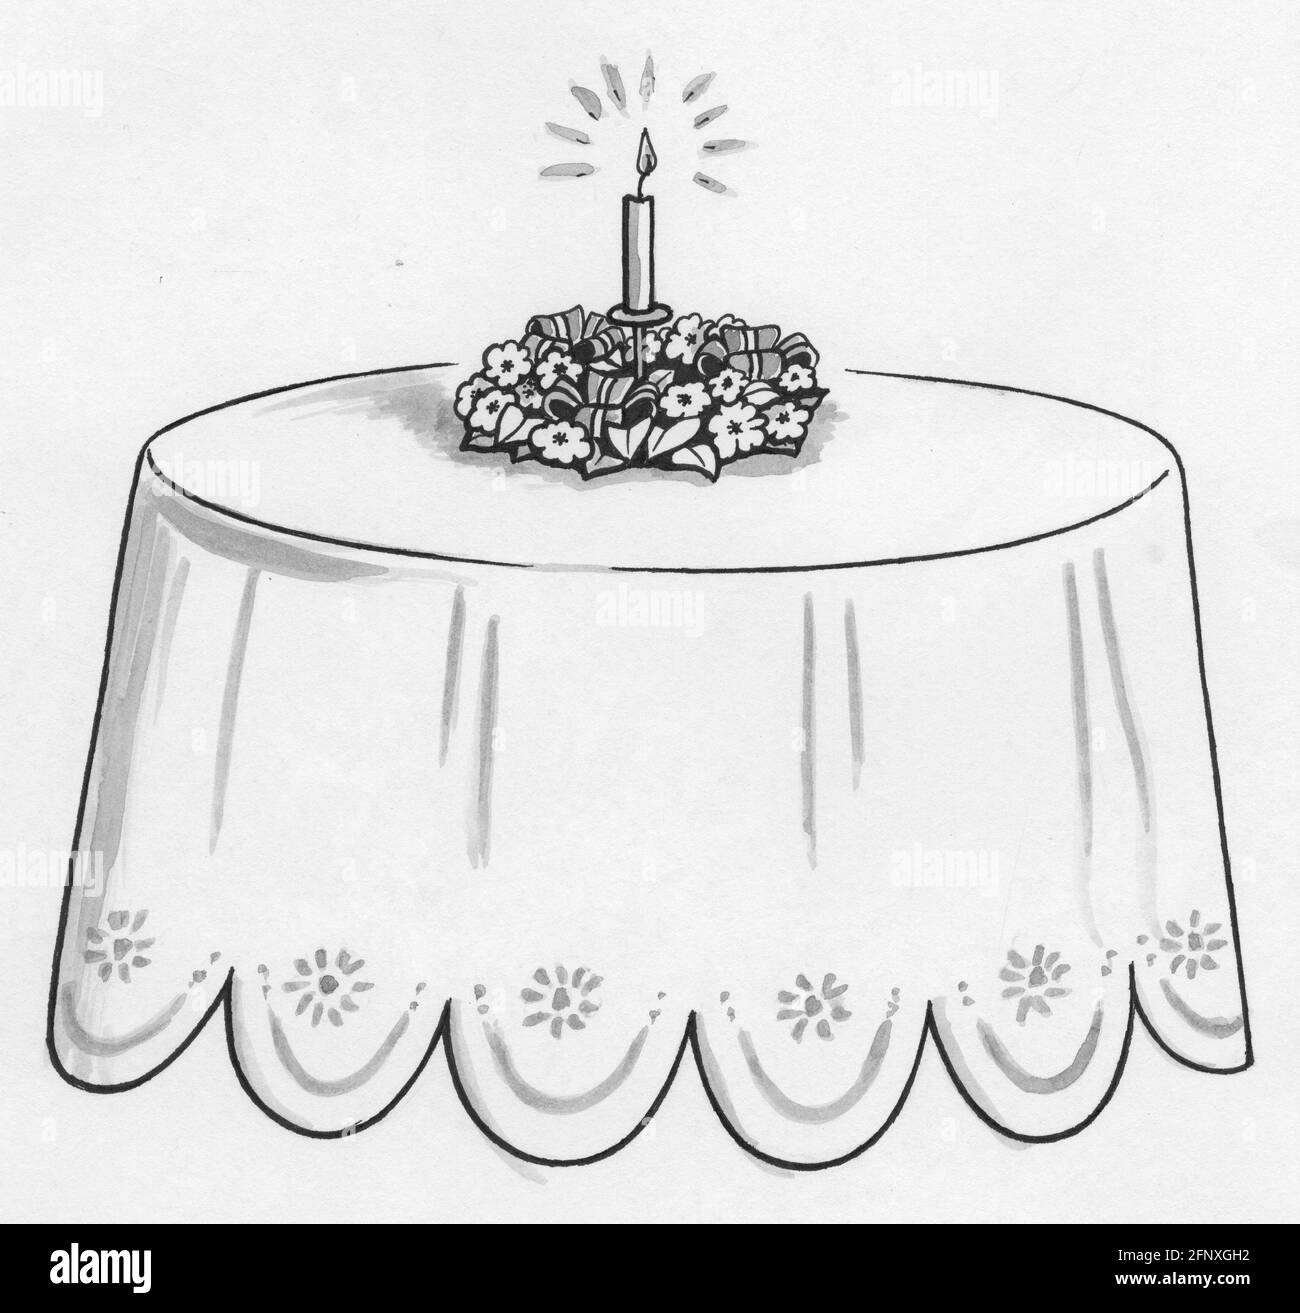 A drawing of a round table set with a flower centrepiece and a candle Stock Photo